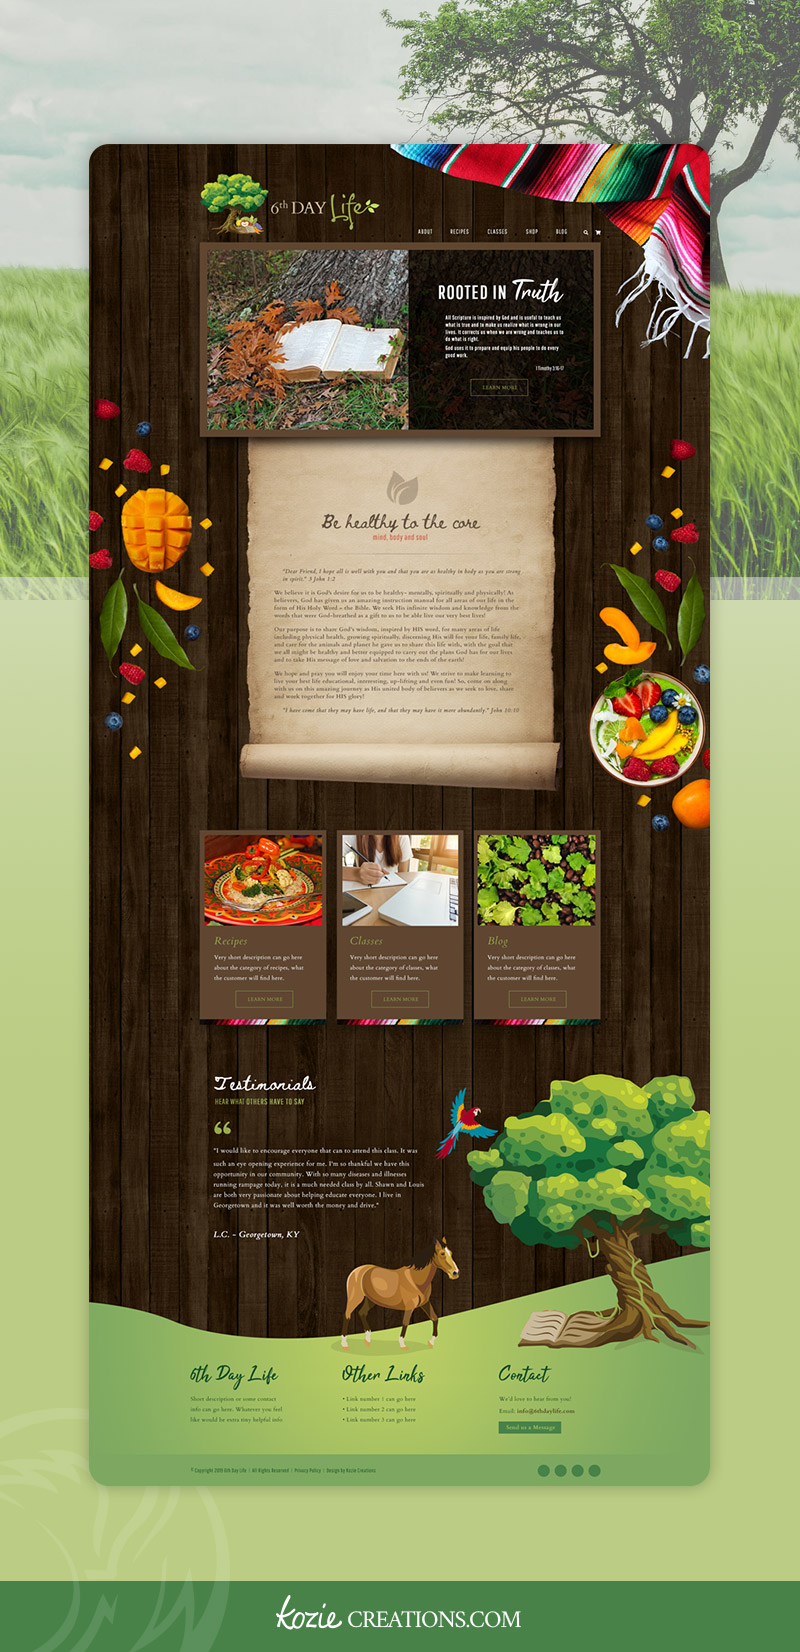 Web Design for 6th Day Life